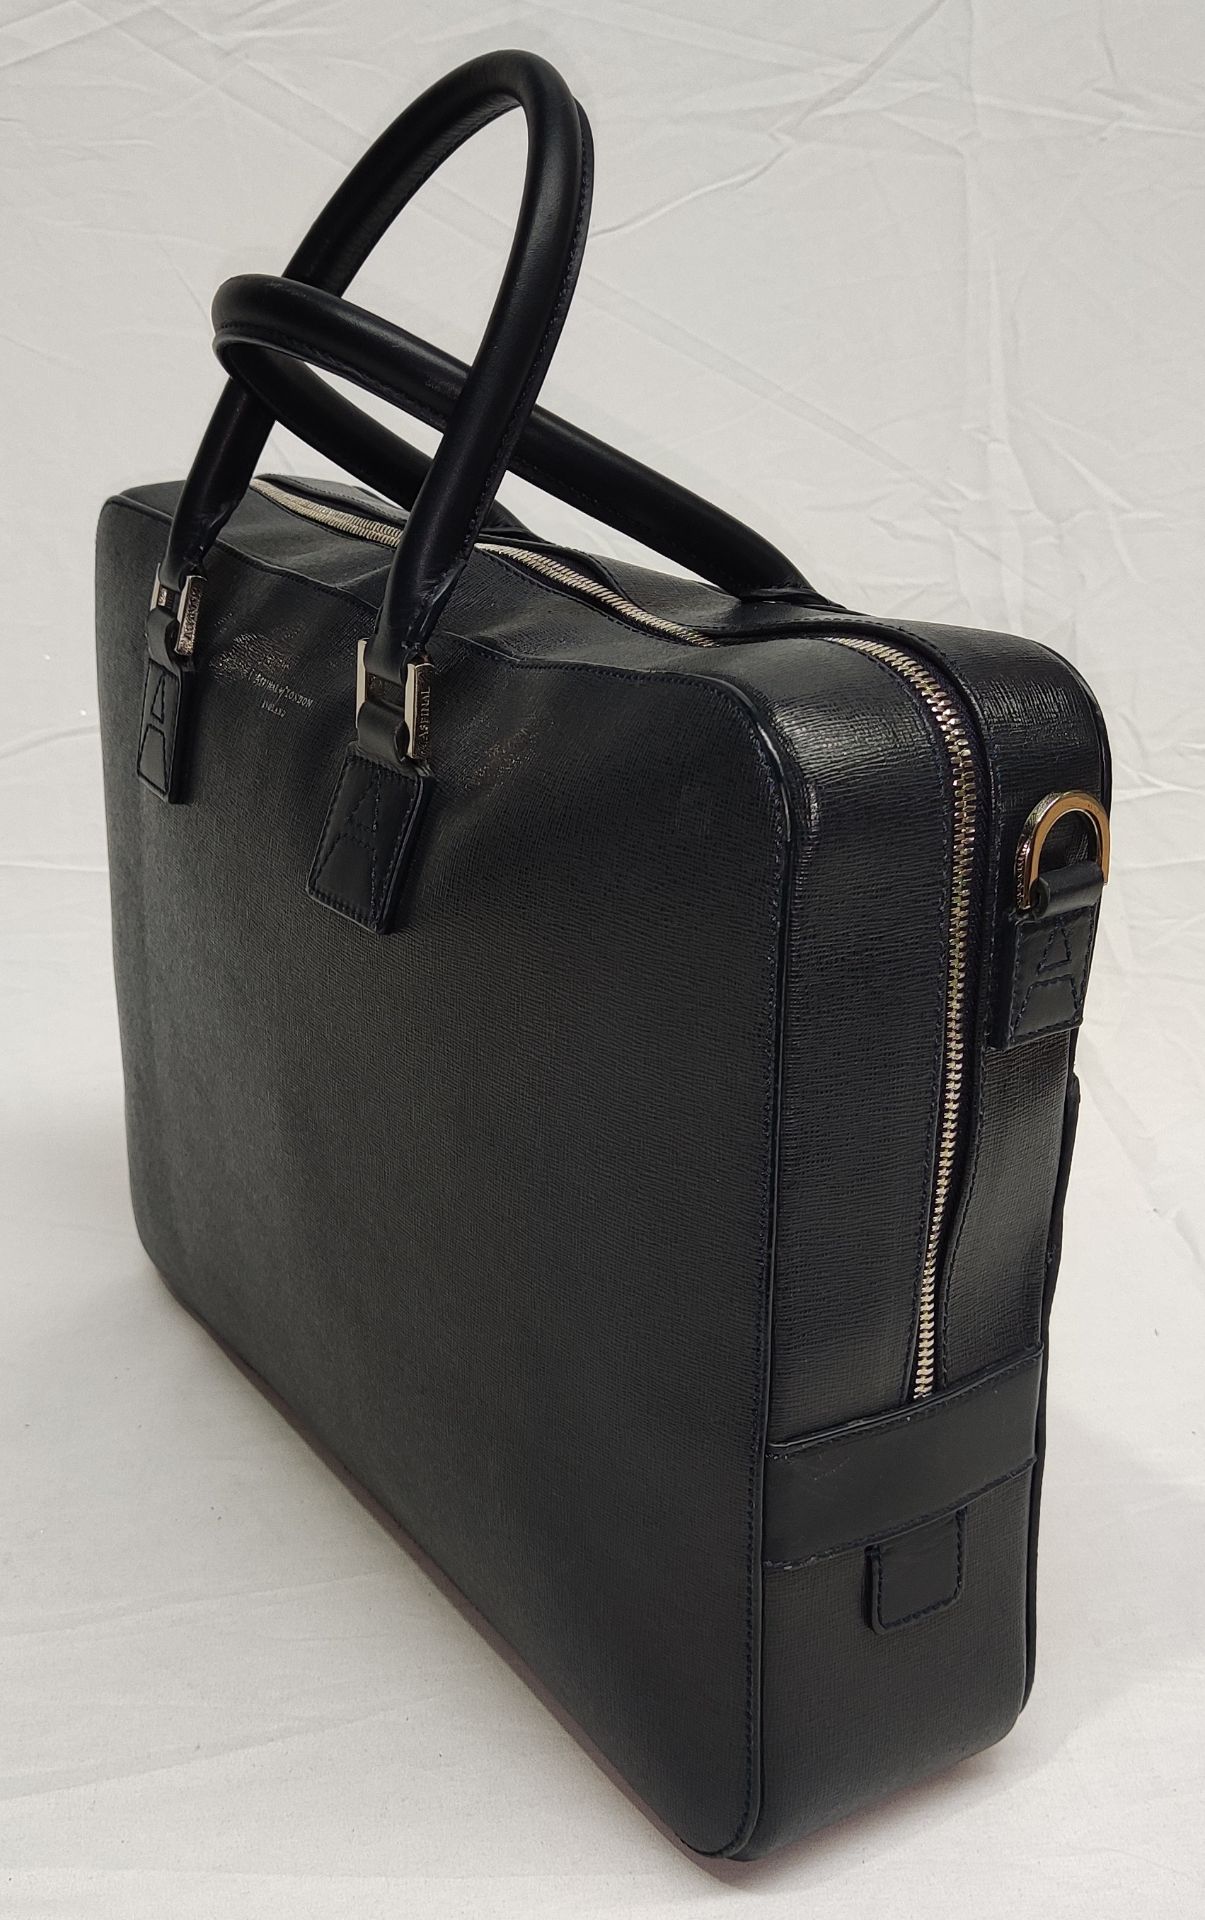 1 x ASPINAL OF LONDON Mount Street Small Laptop Bag In Black Saffiano - Original RRP £650.00 - Image 2 of 21